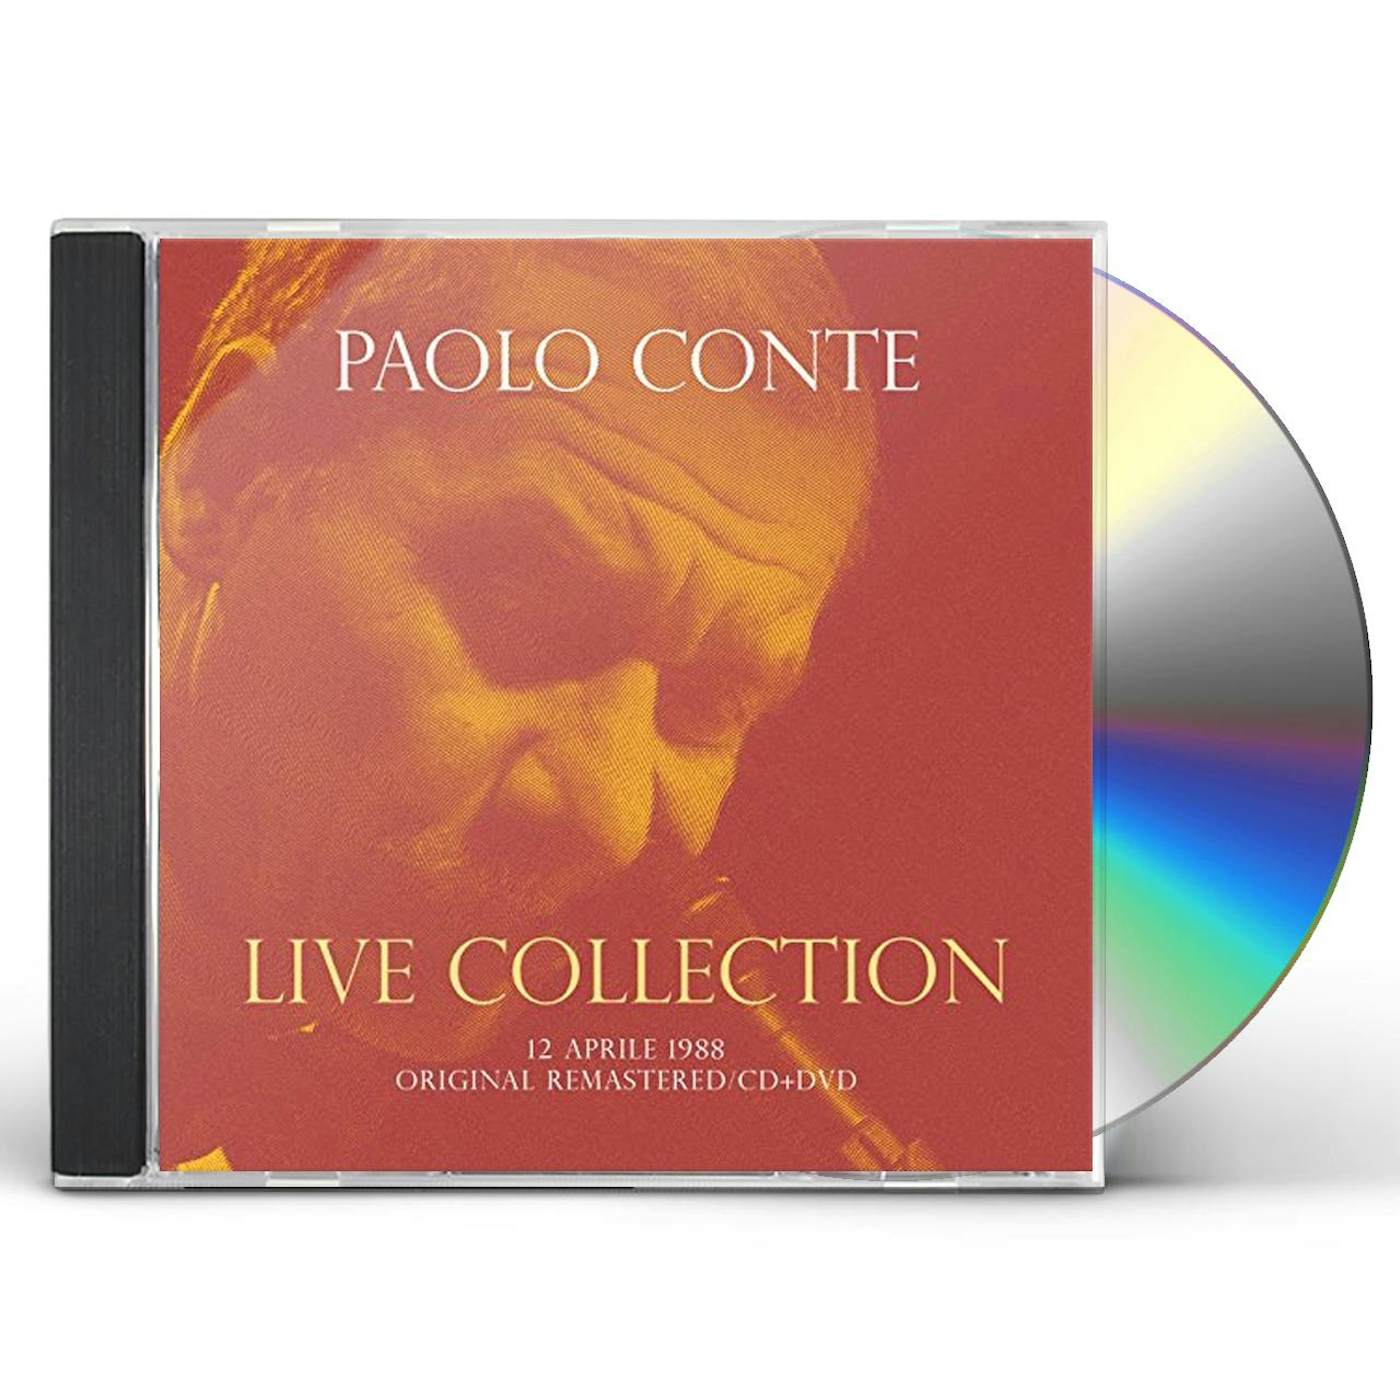 Paolo Conte CONCERTO LIVE AT RSI (12 APRILE 1988) - CD+DVD DIG CD